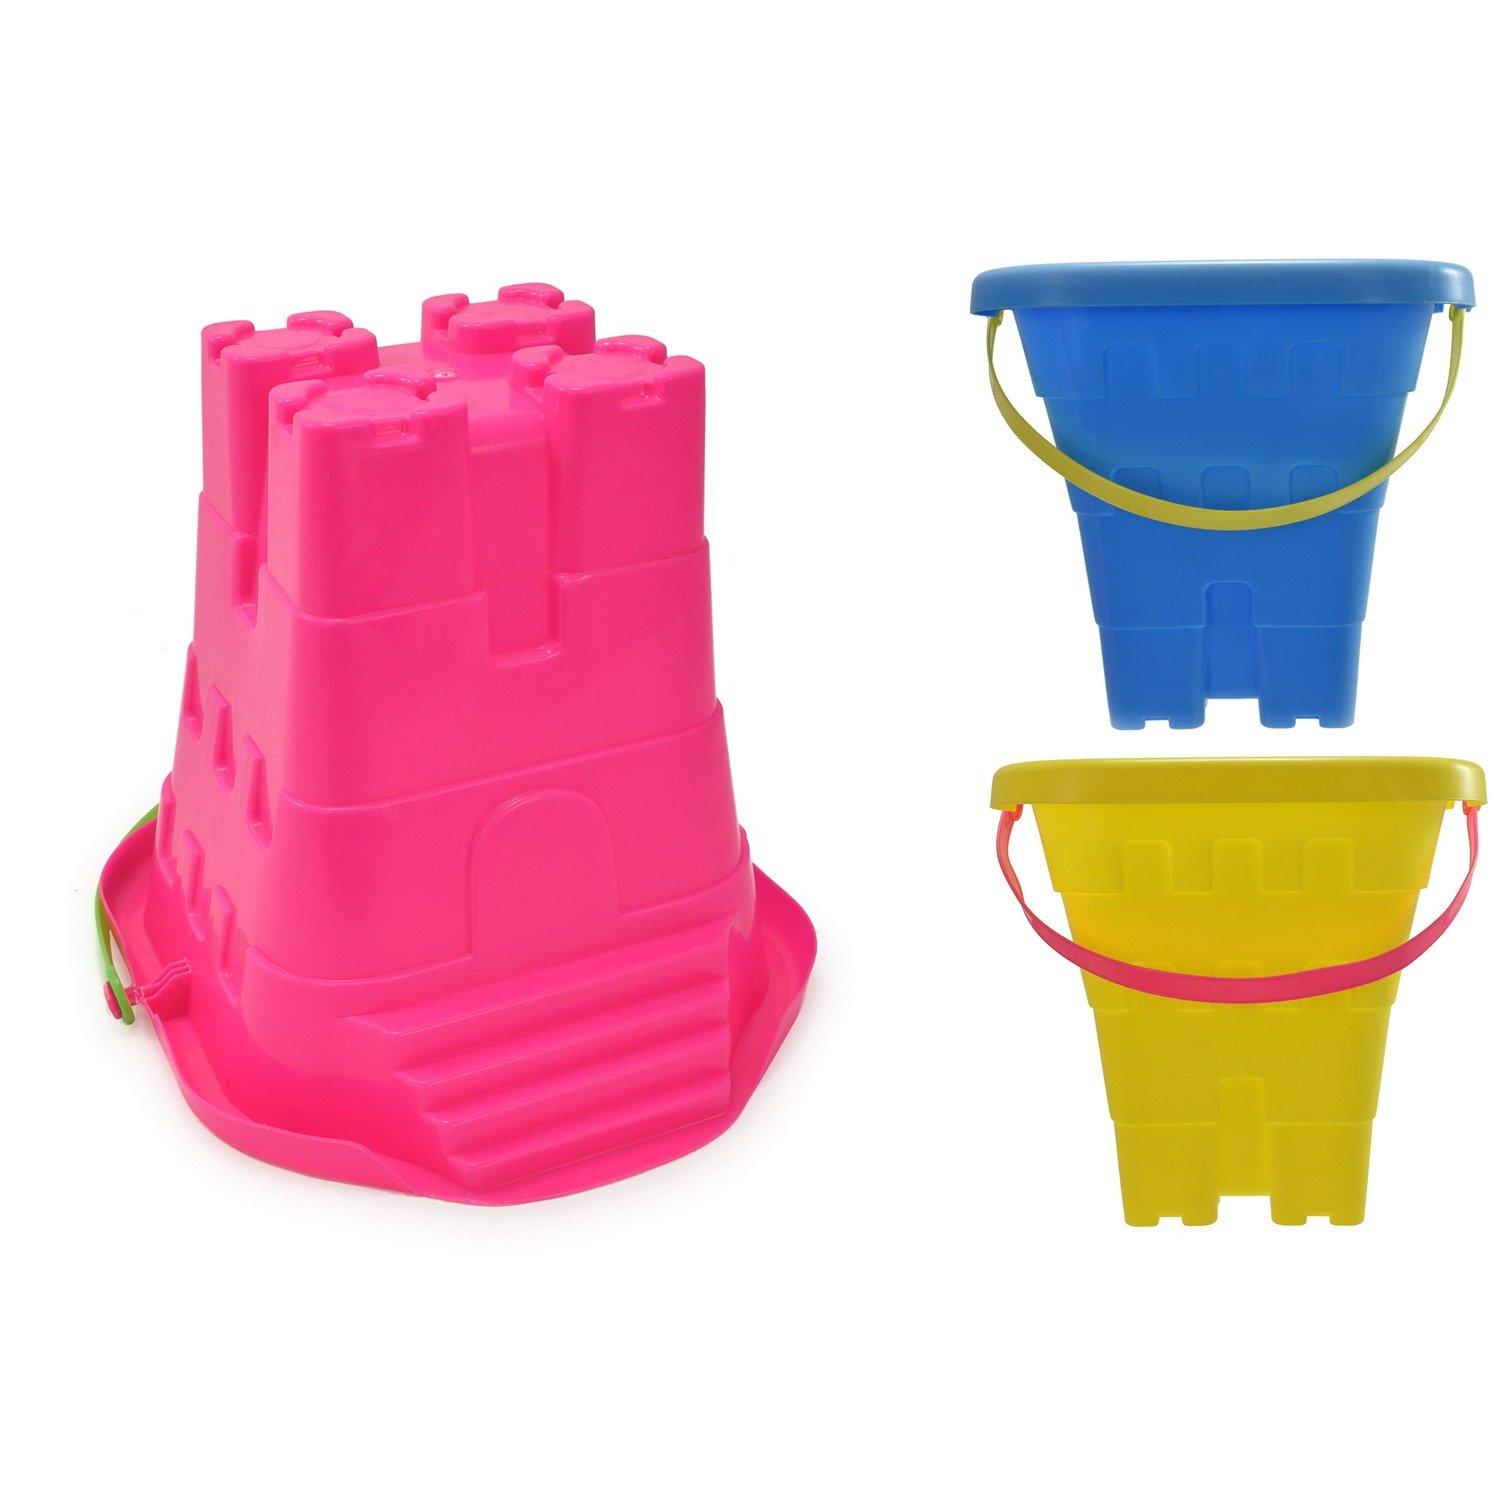 8"/20cm Square Sand Castle Beach Bucket With Steps